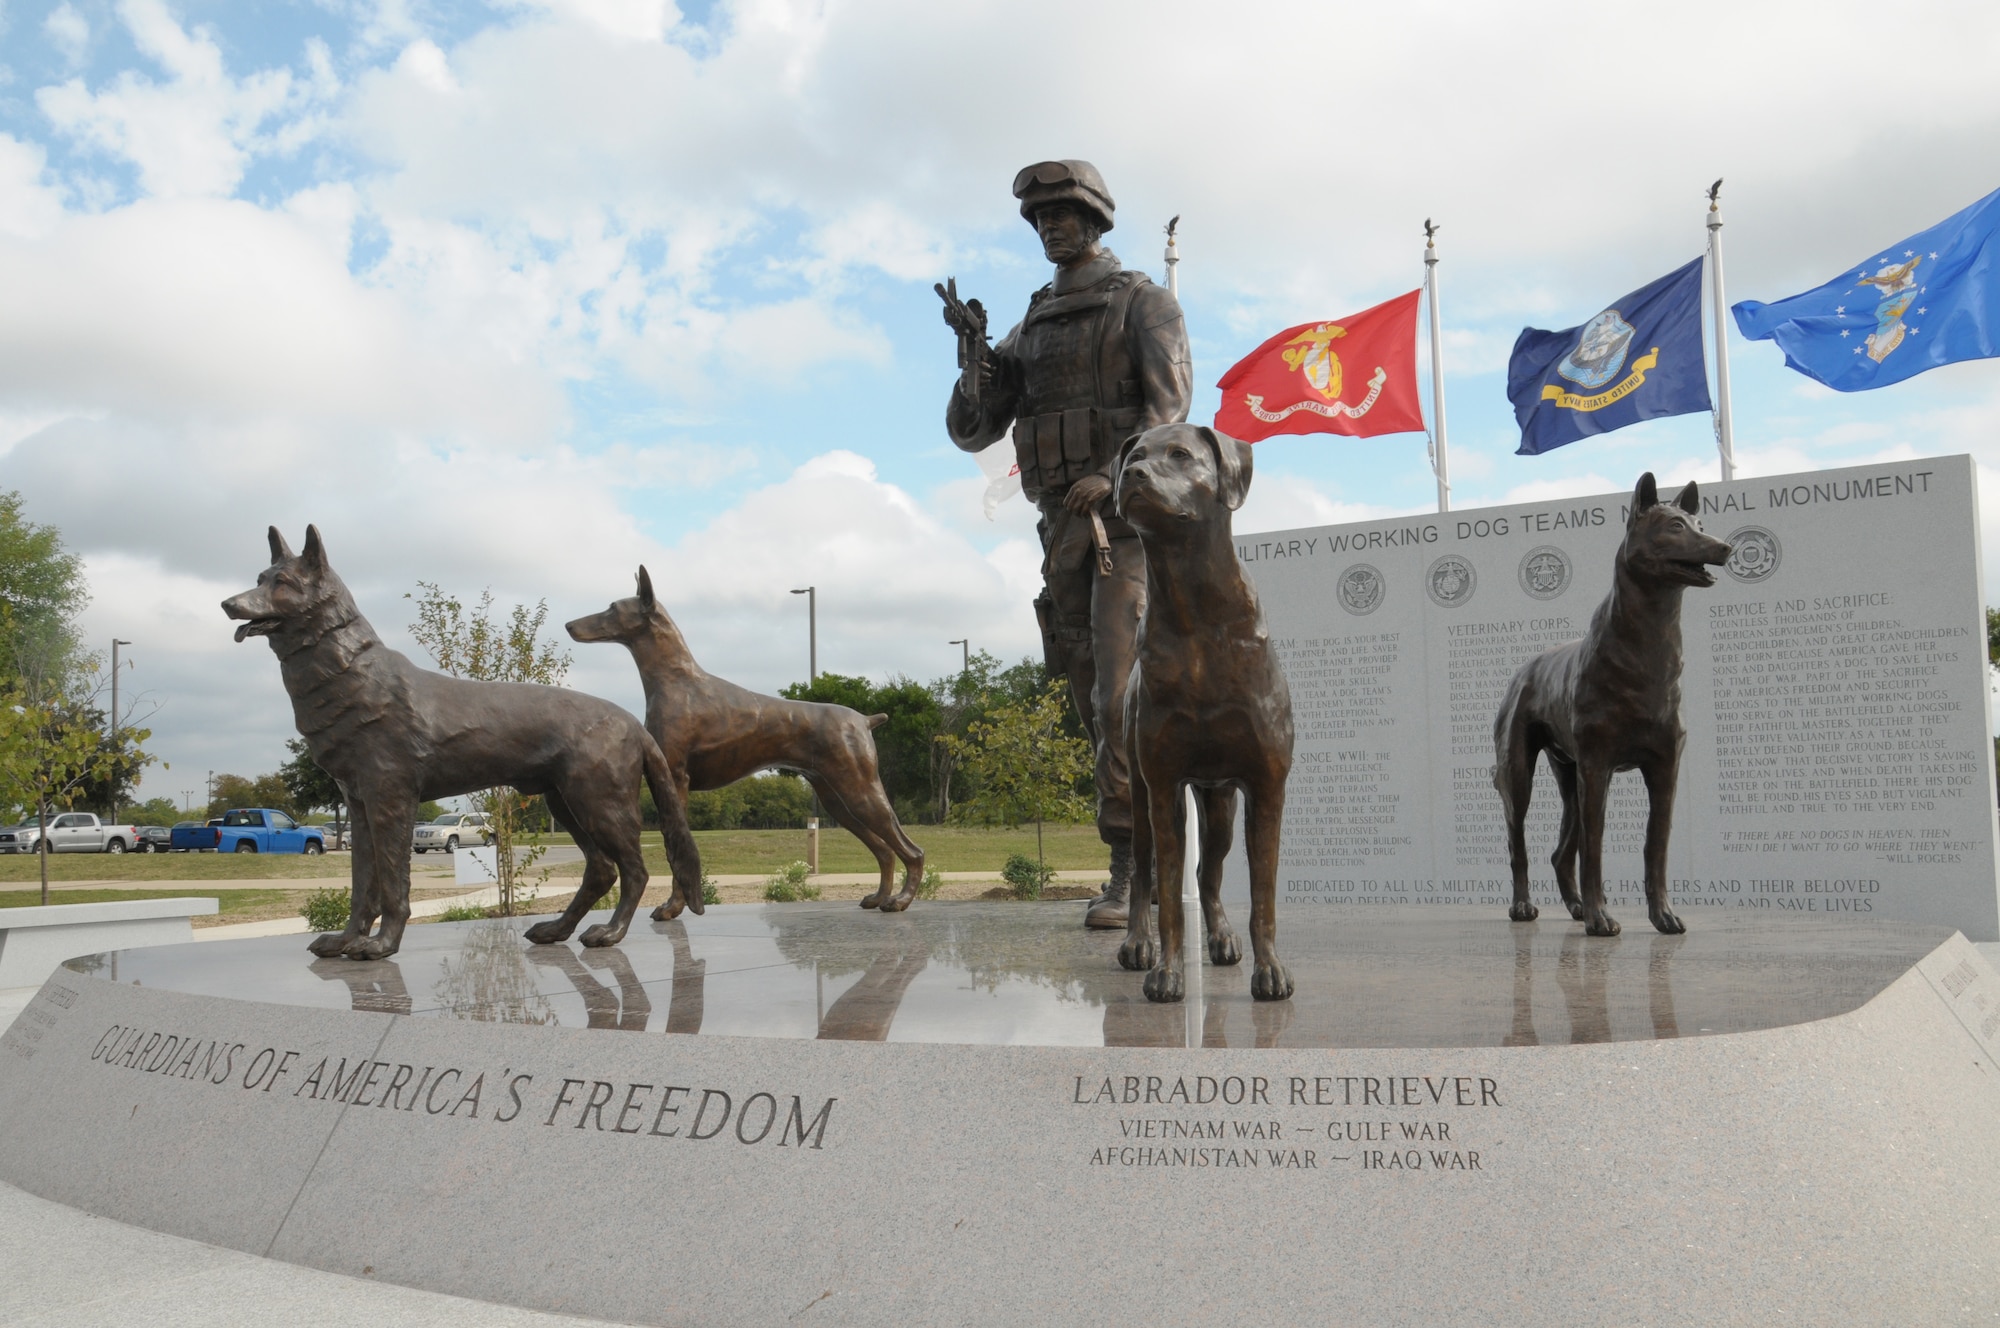 The Military Working Dog Teams’ National Monument is a new display at Joint Base San Antonio-Lackland, Texas honoring U.S. Military Working Dog teams. The monument was revealed Oct. 28, 2013. (U.S. Air Force photo by Airman 1st Class Krystal M. Jeffers/Released)